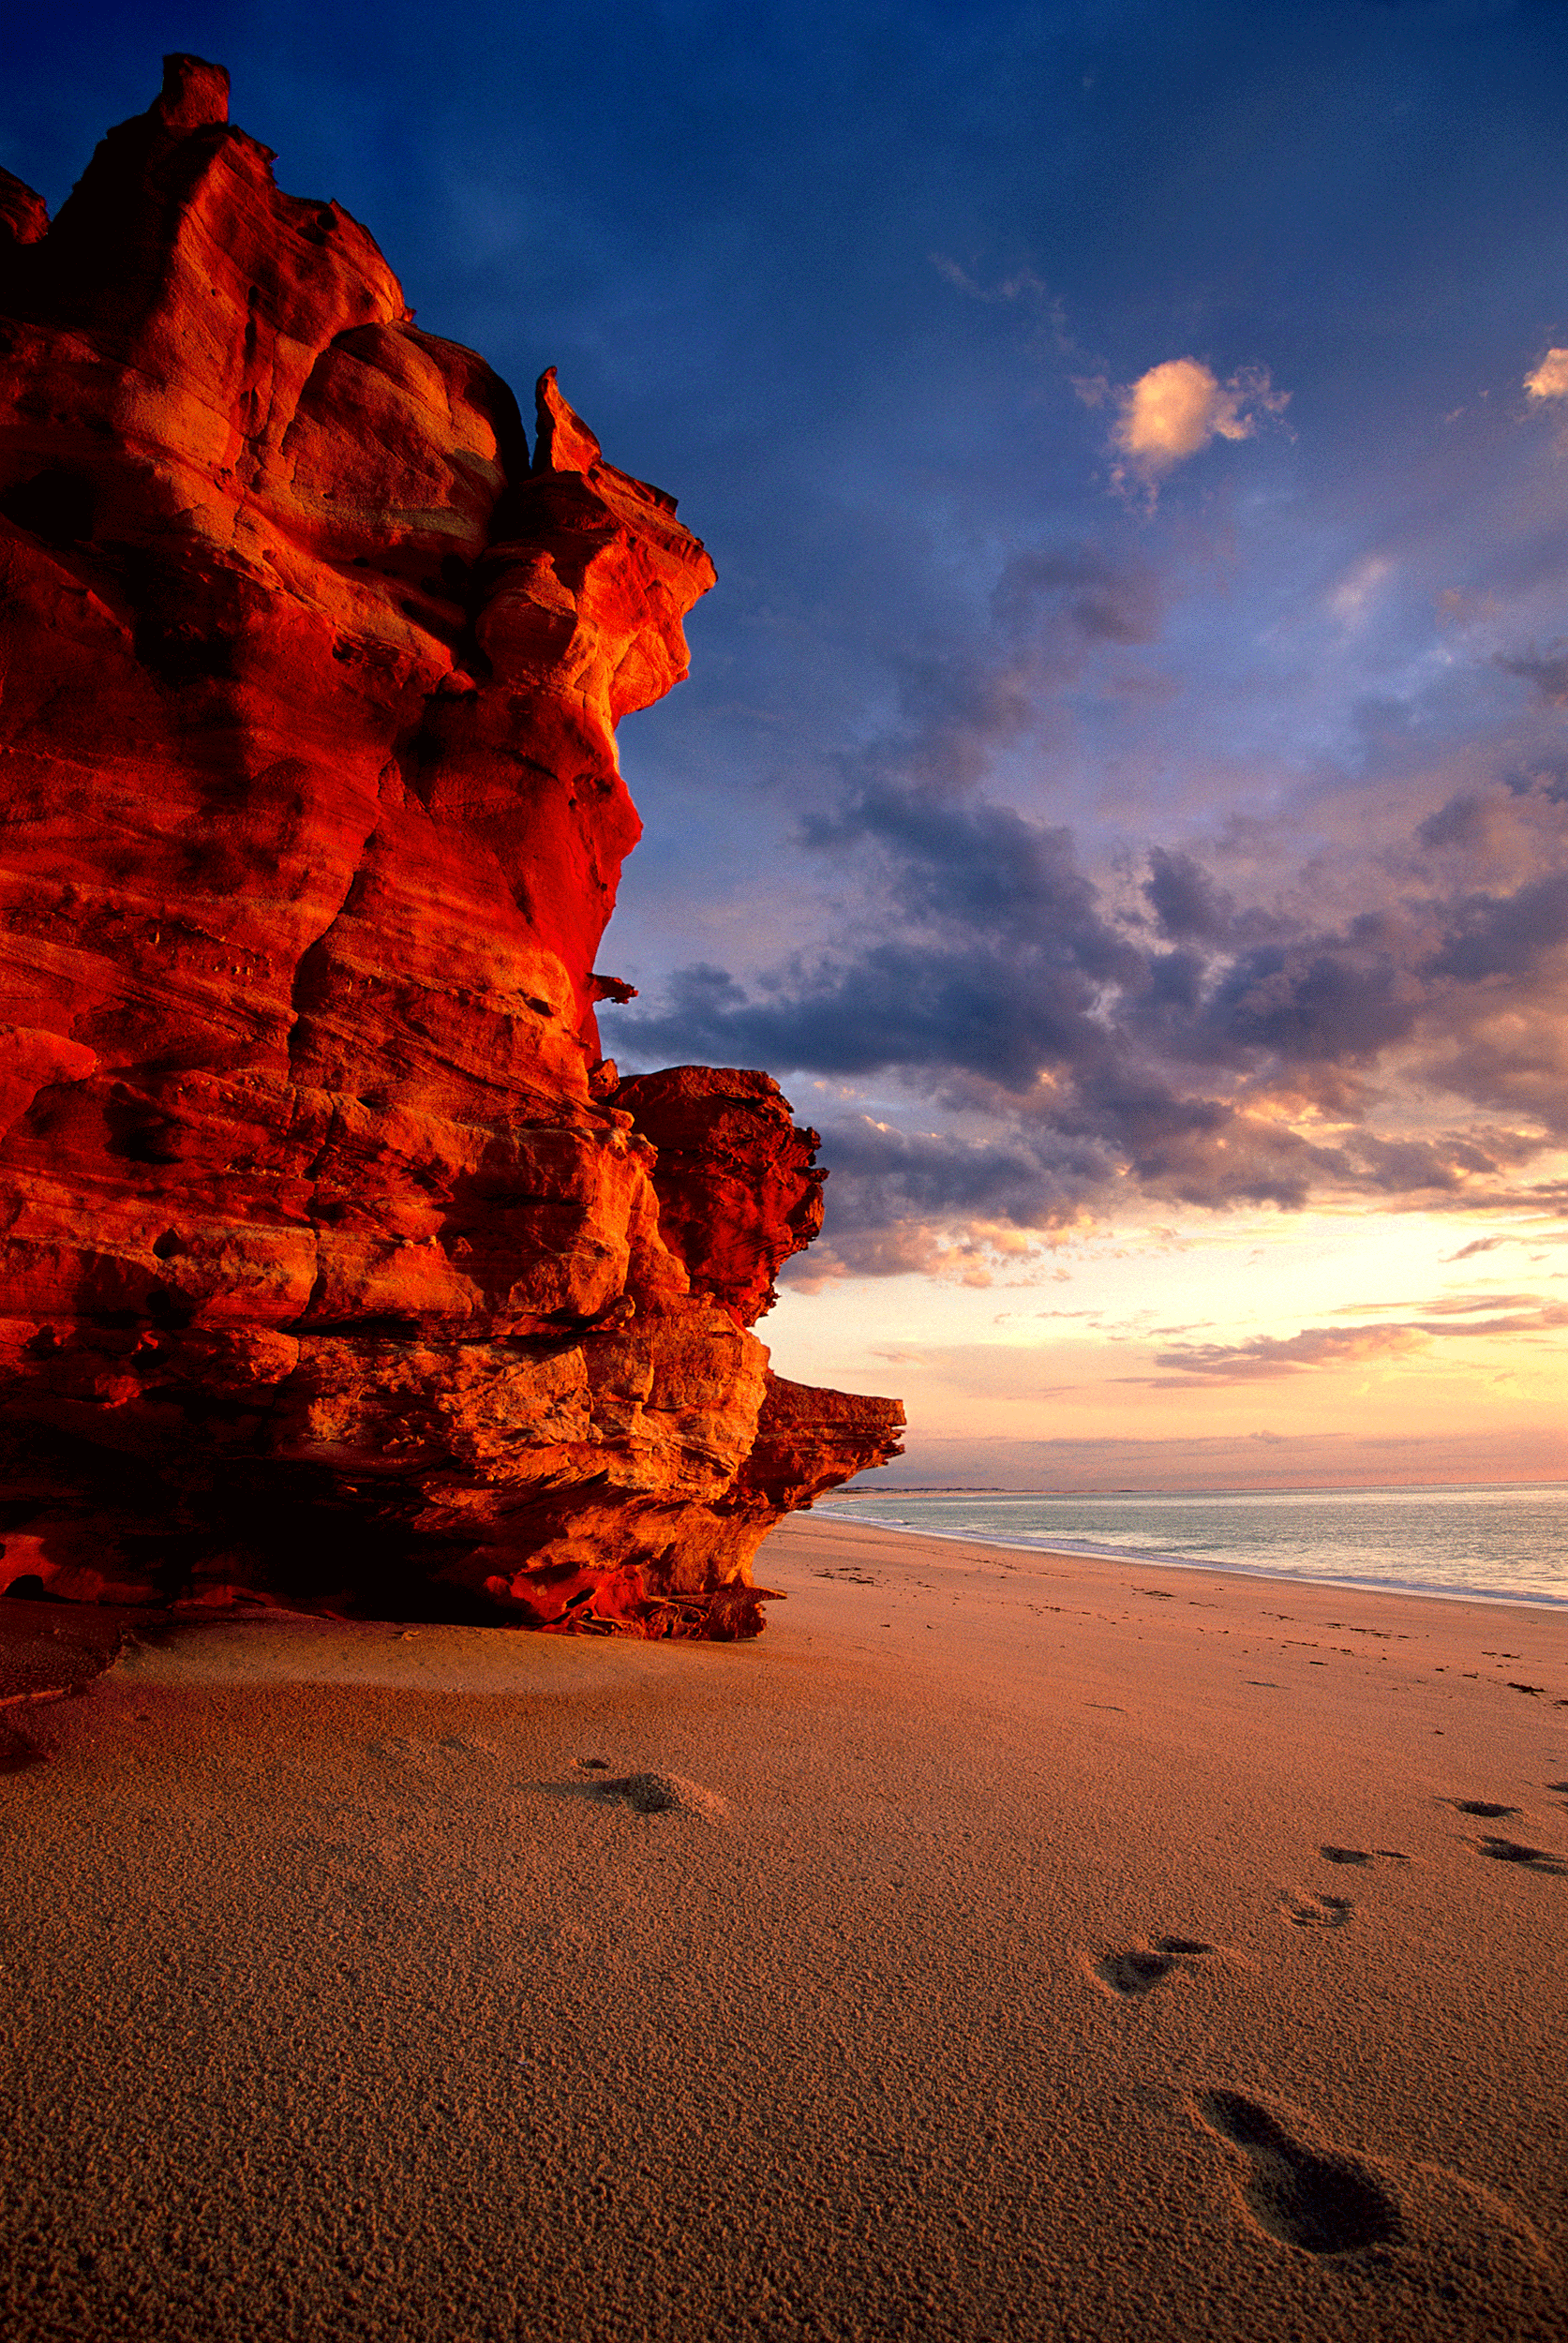  Nature's Light Show, Cape Leveque, Kimberley, Western Australia, 1999.&nbsp; Edition of 100. 